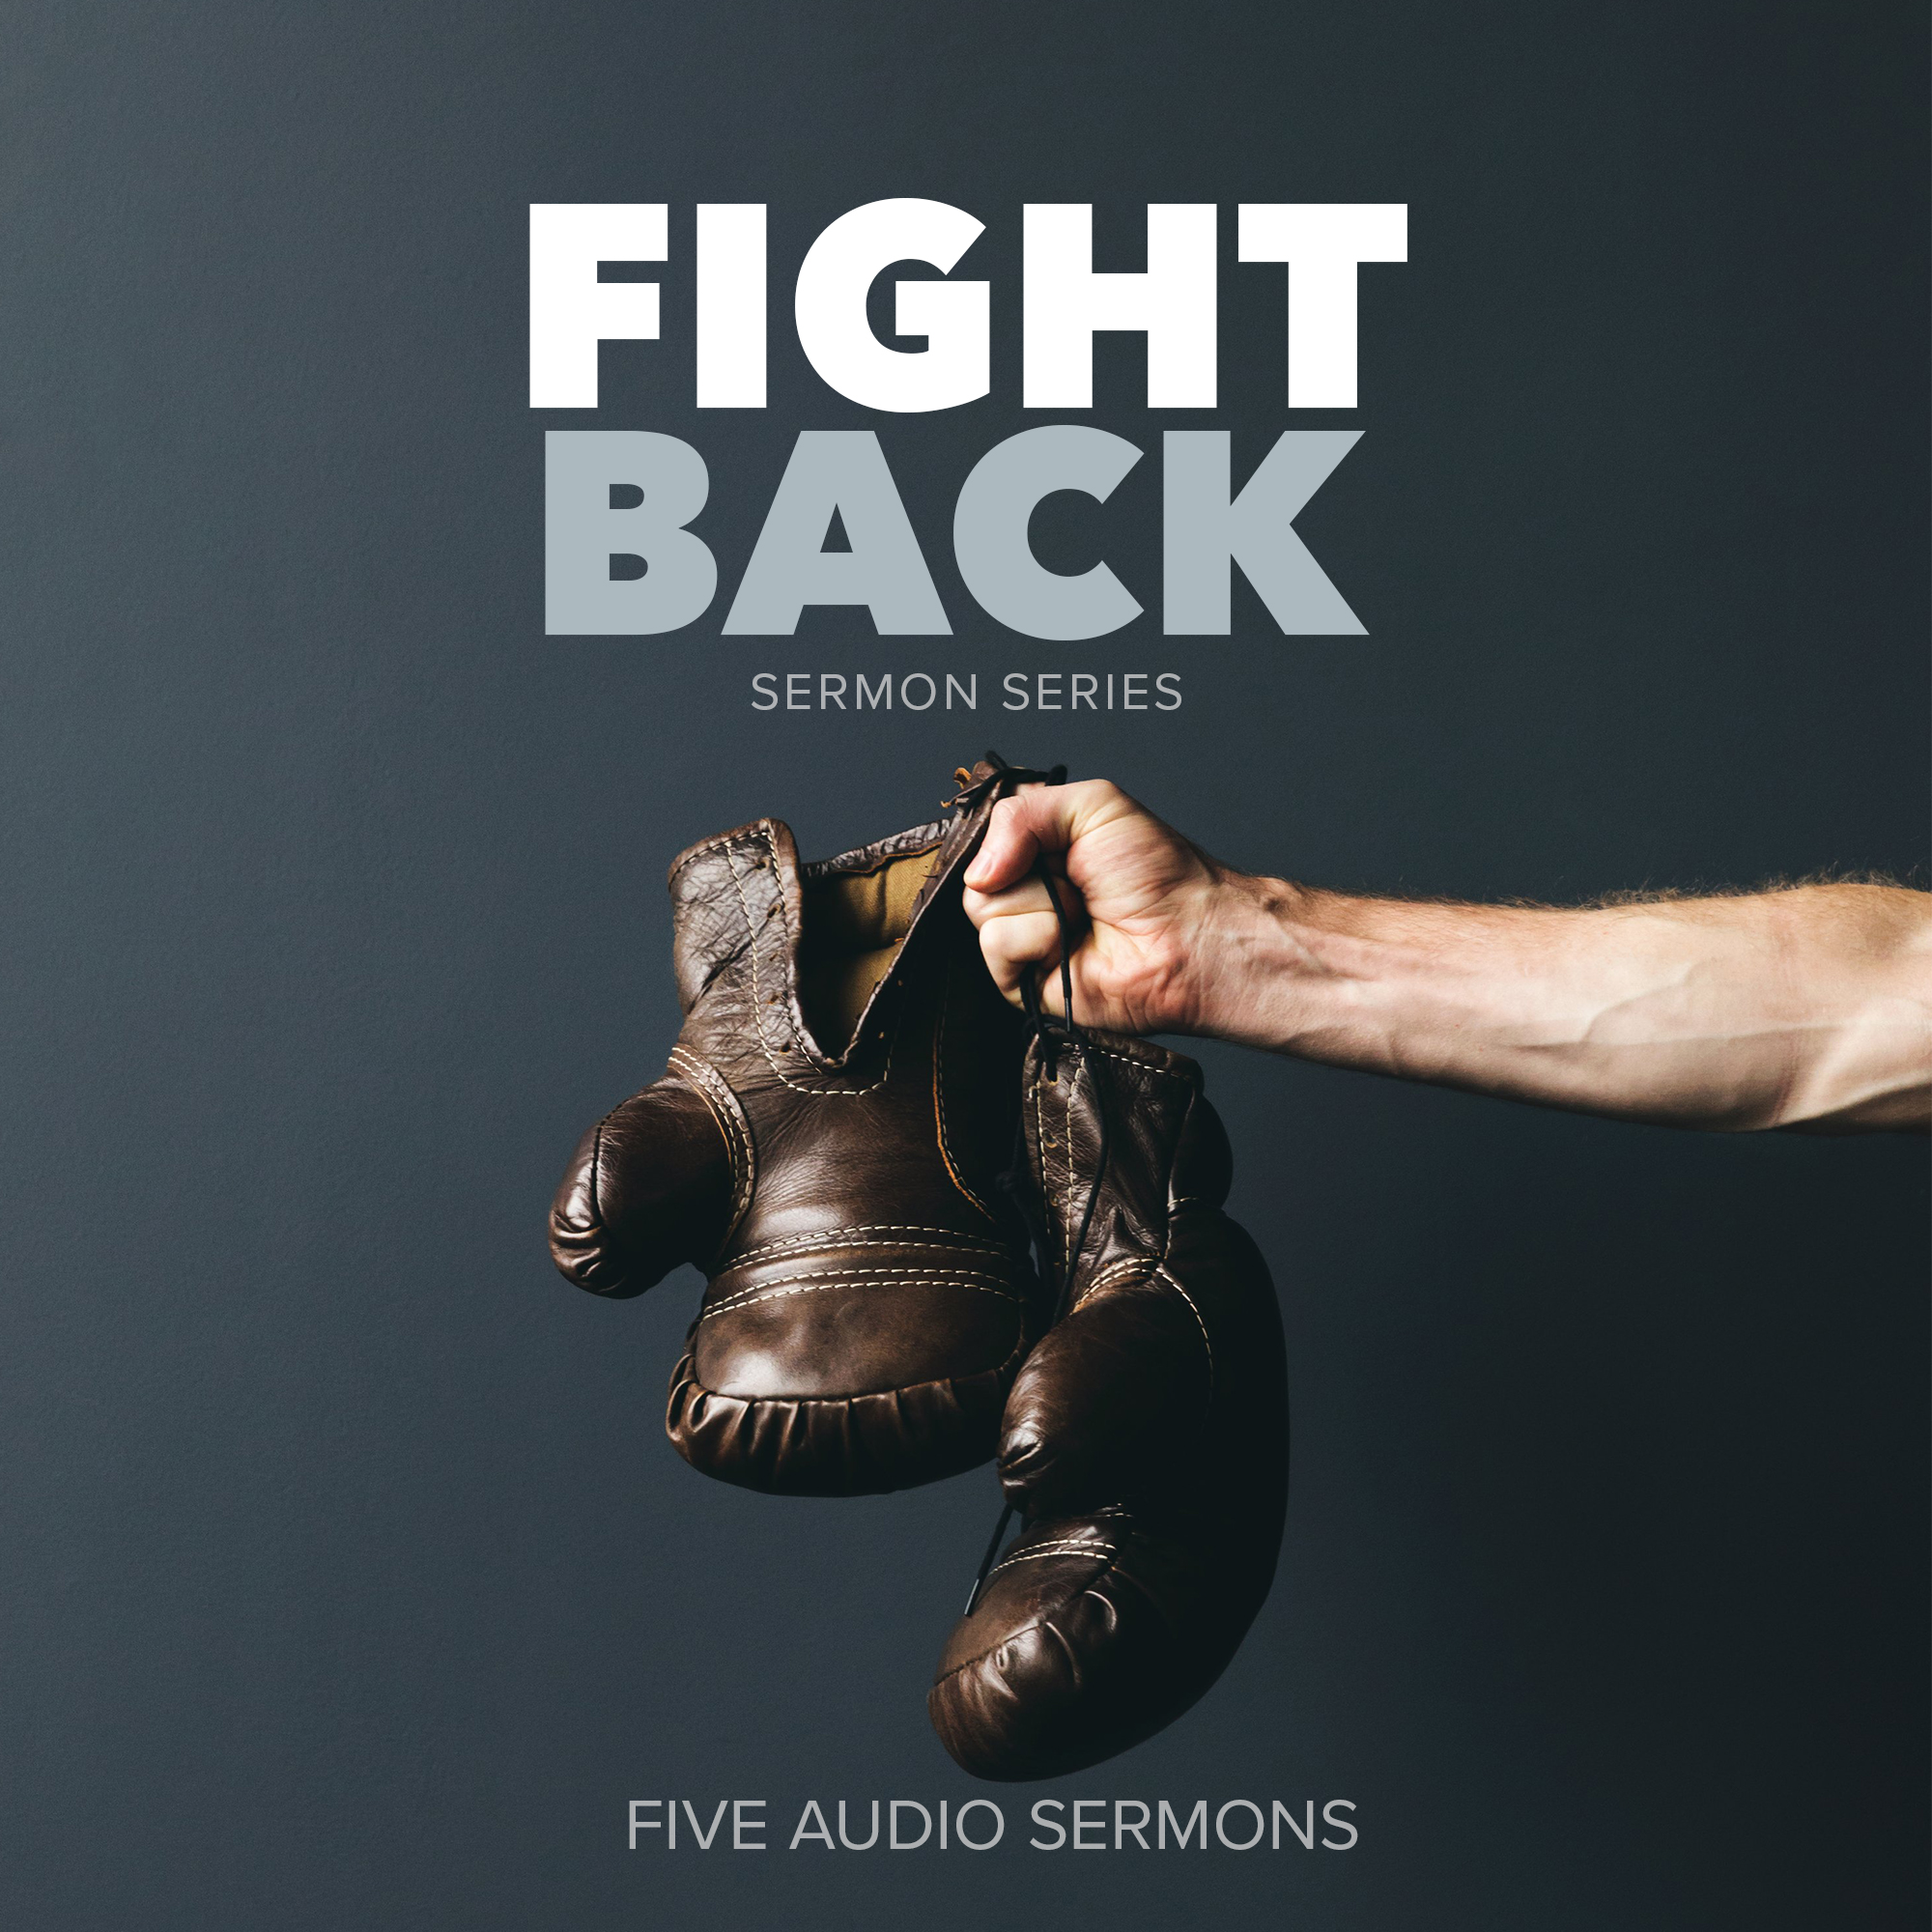 Series: Fight Back